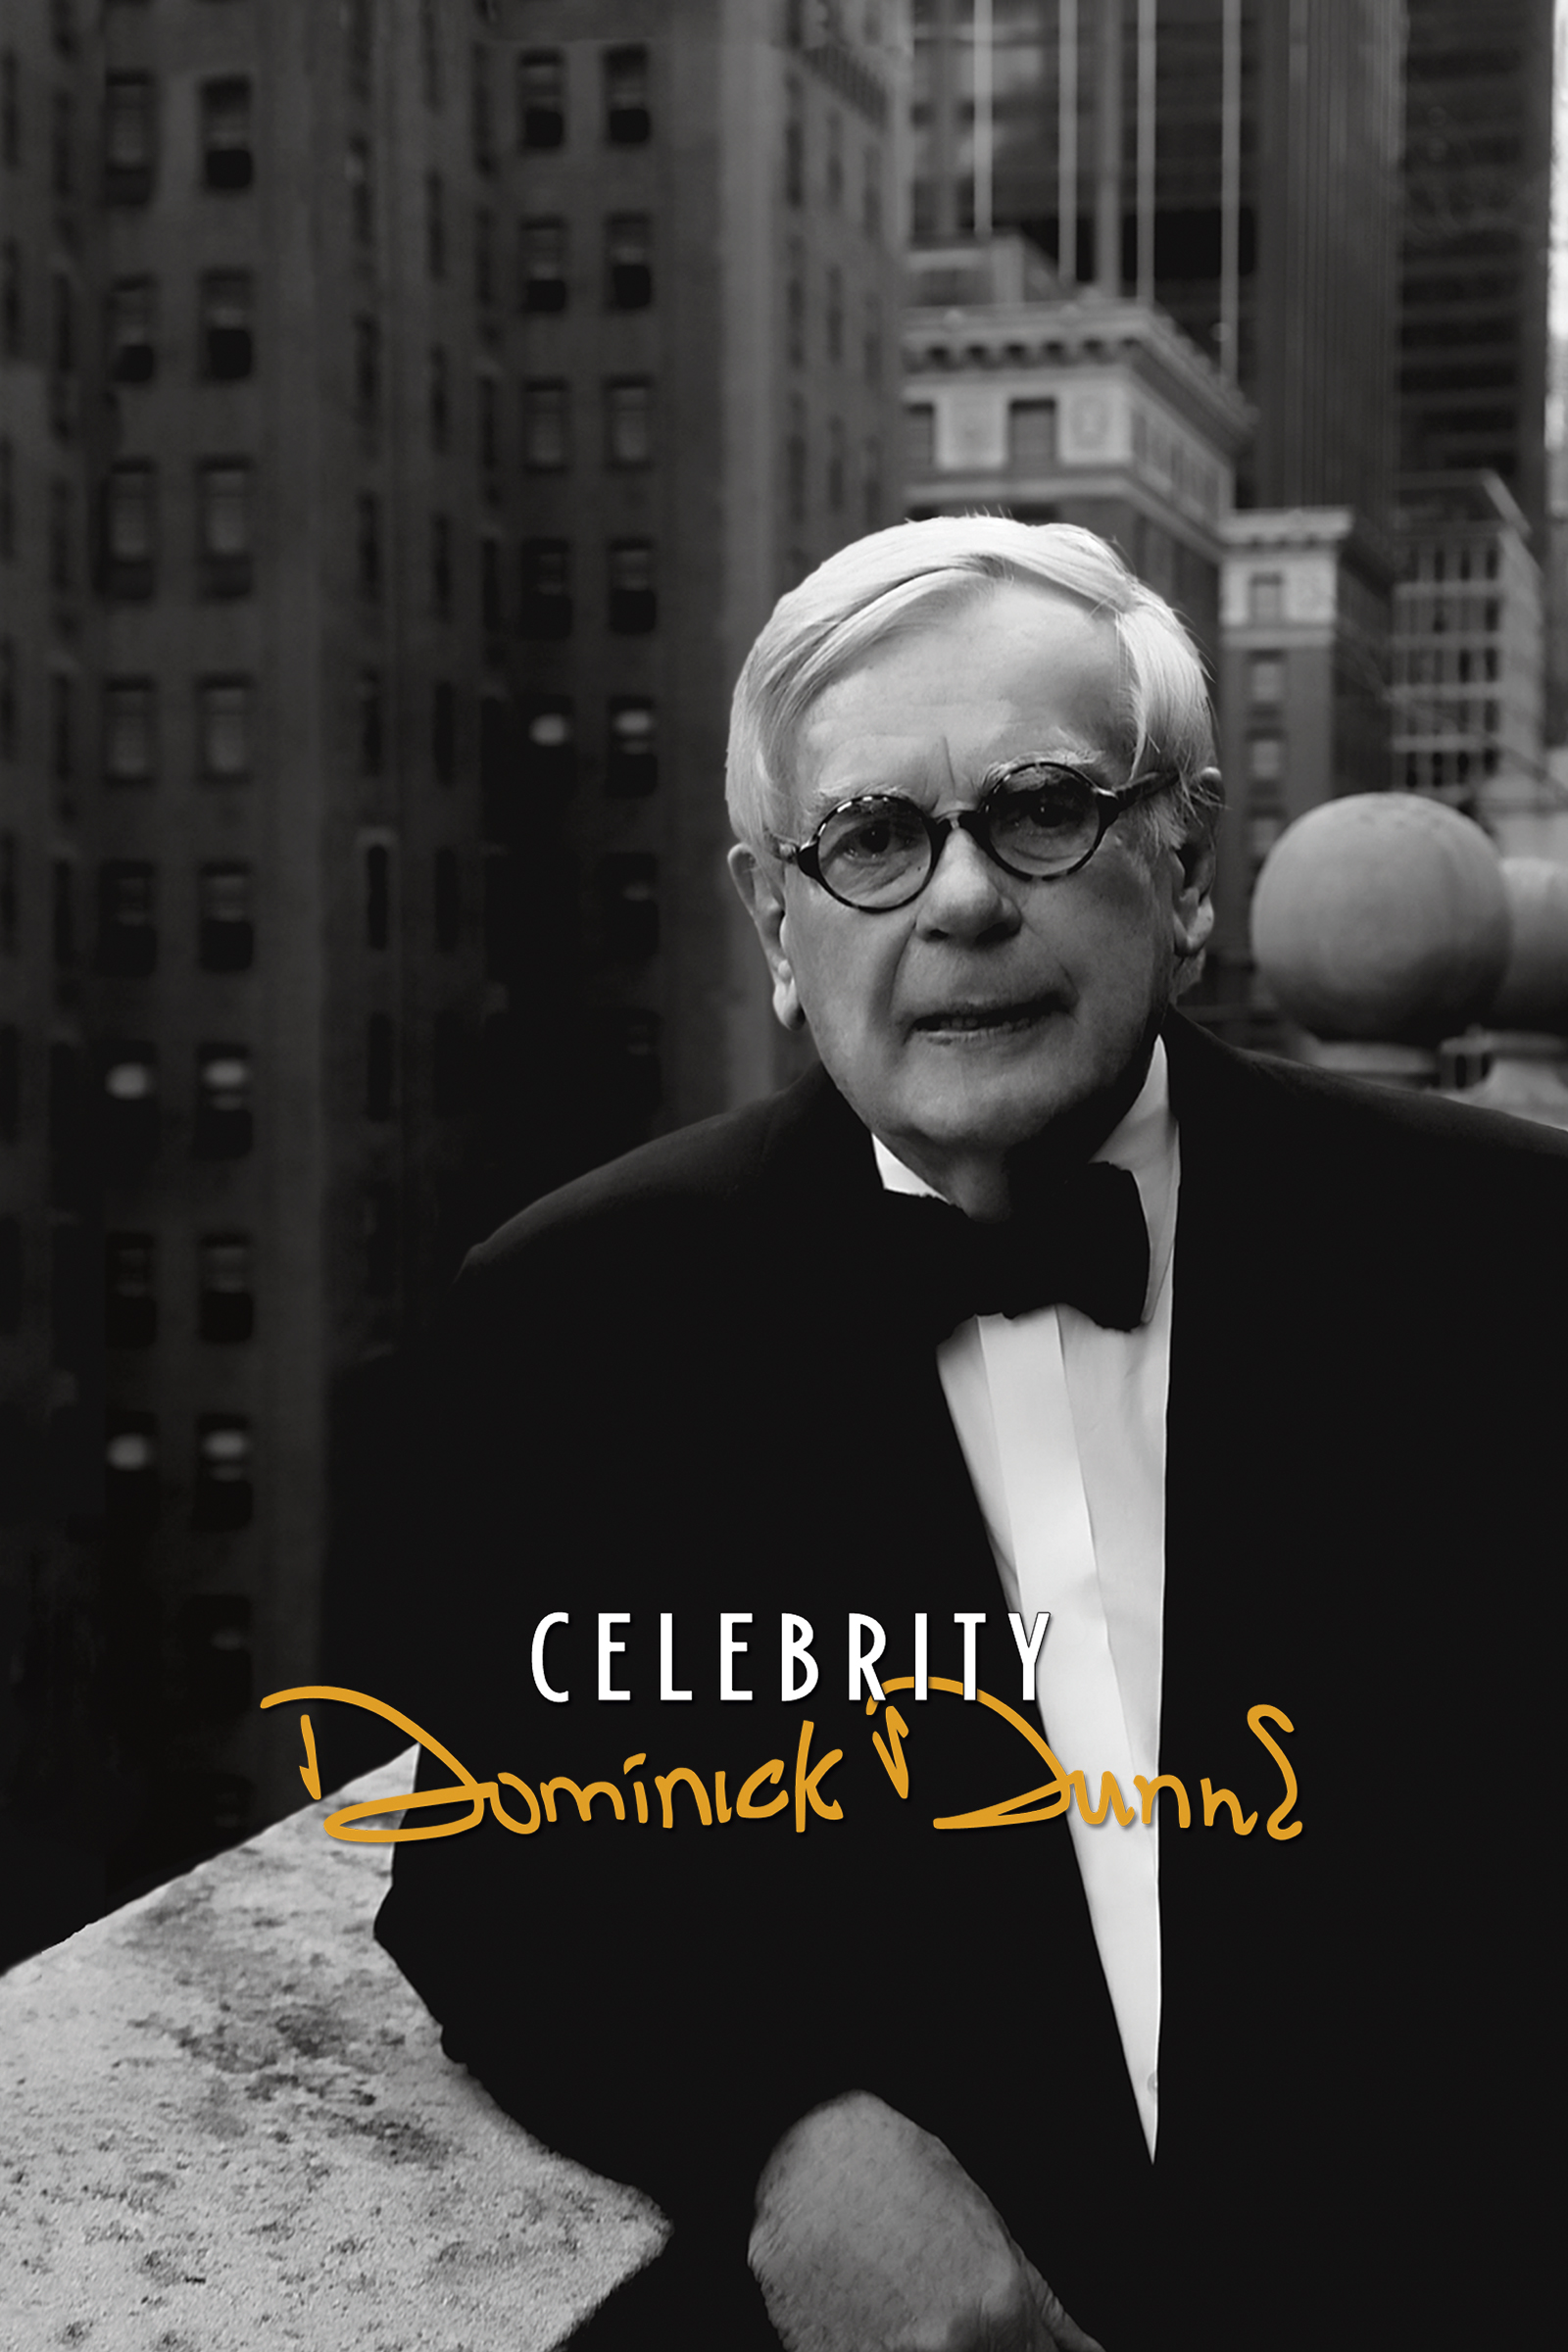 Where to stream Celebrity: Dominick Dunne